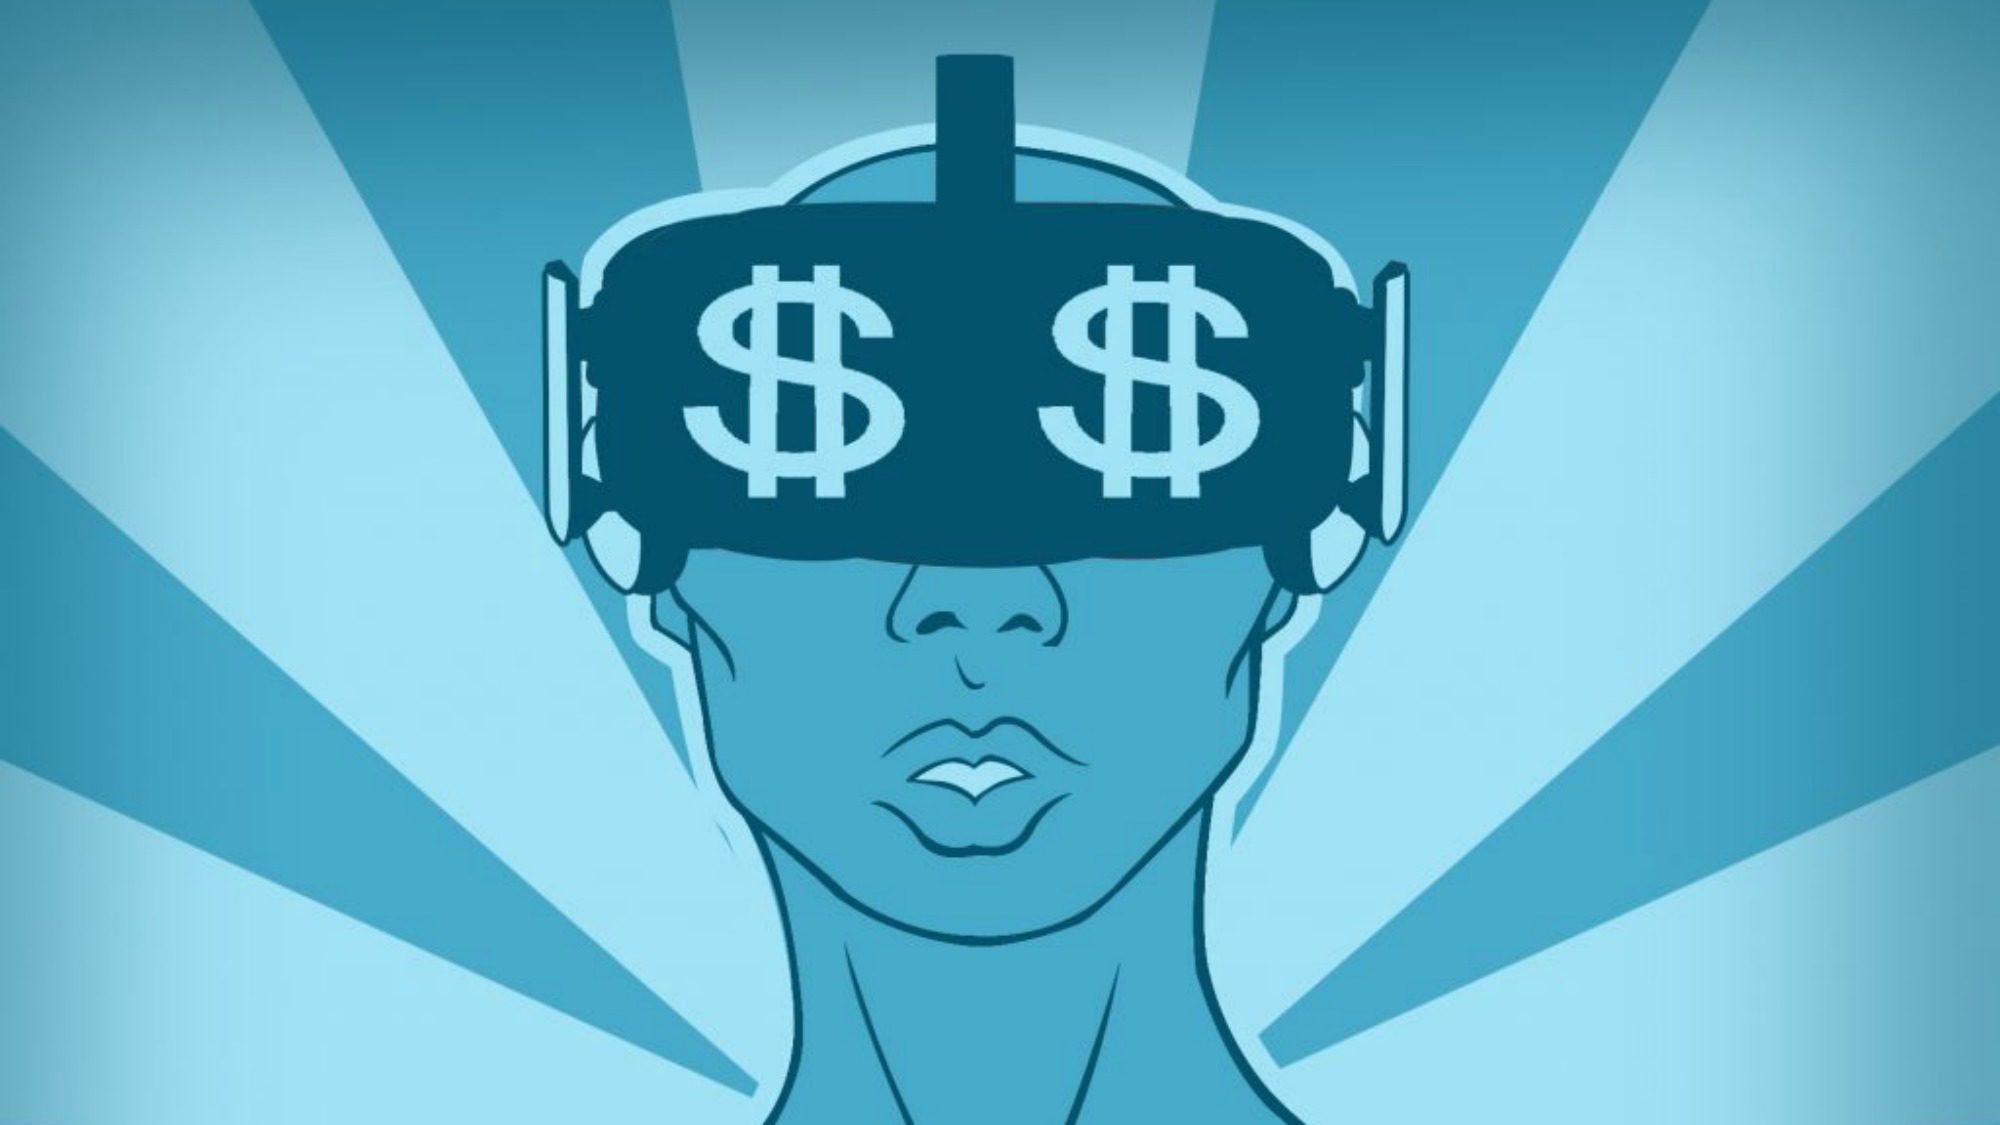 An illustration of an androgynous figure wearing a virtual reality headset with two dollar signs on the visor.